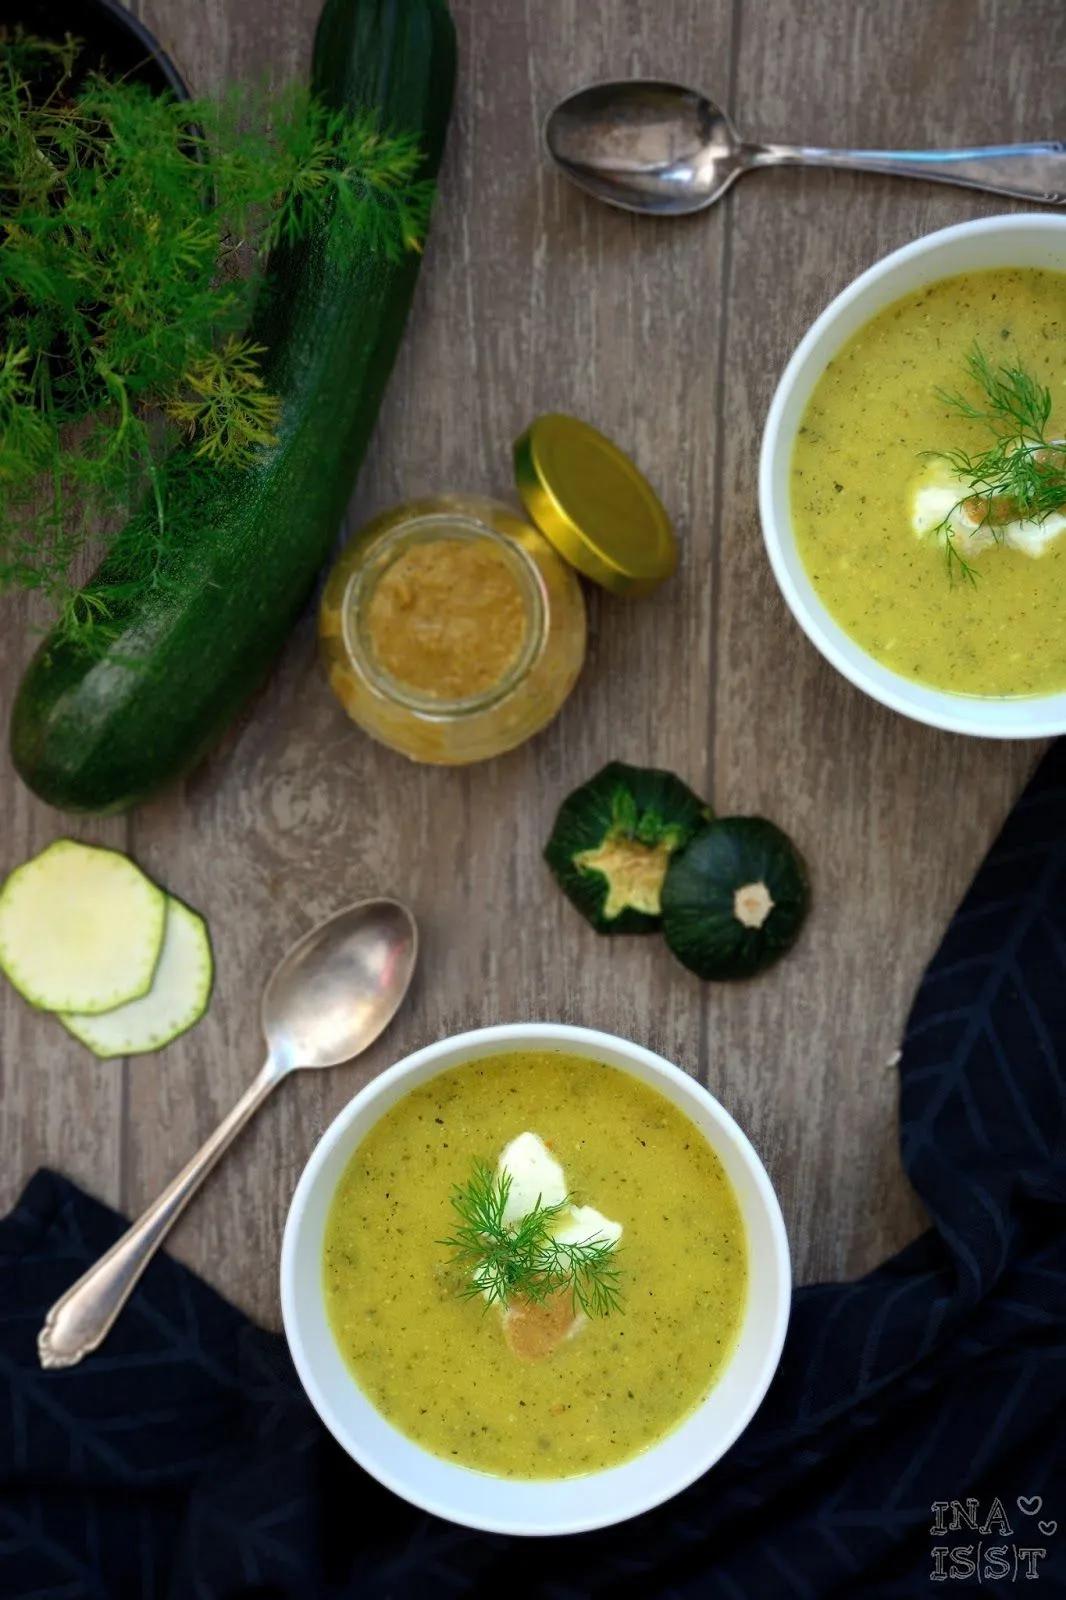 Zucchini-Senf-Suppe mit Dill / Zucchini soup with mustard and dill ...